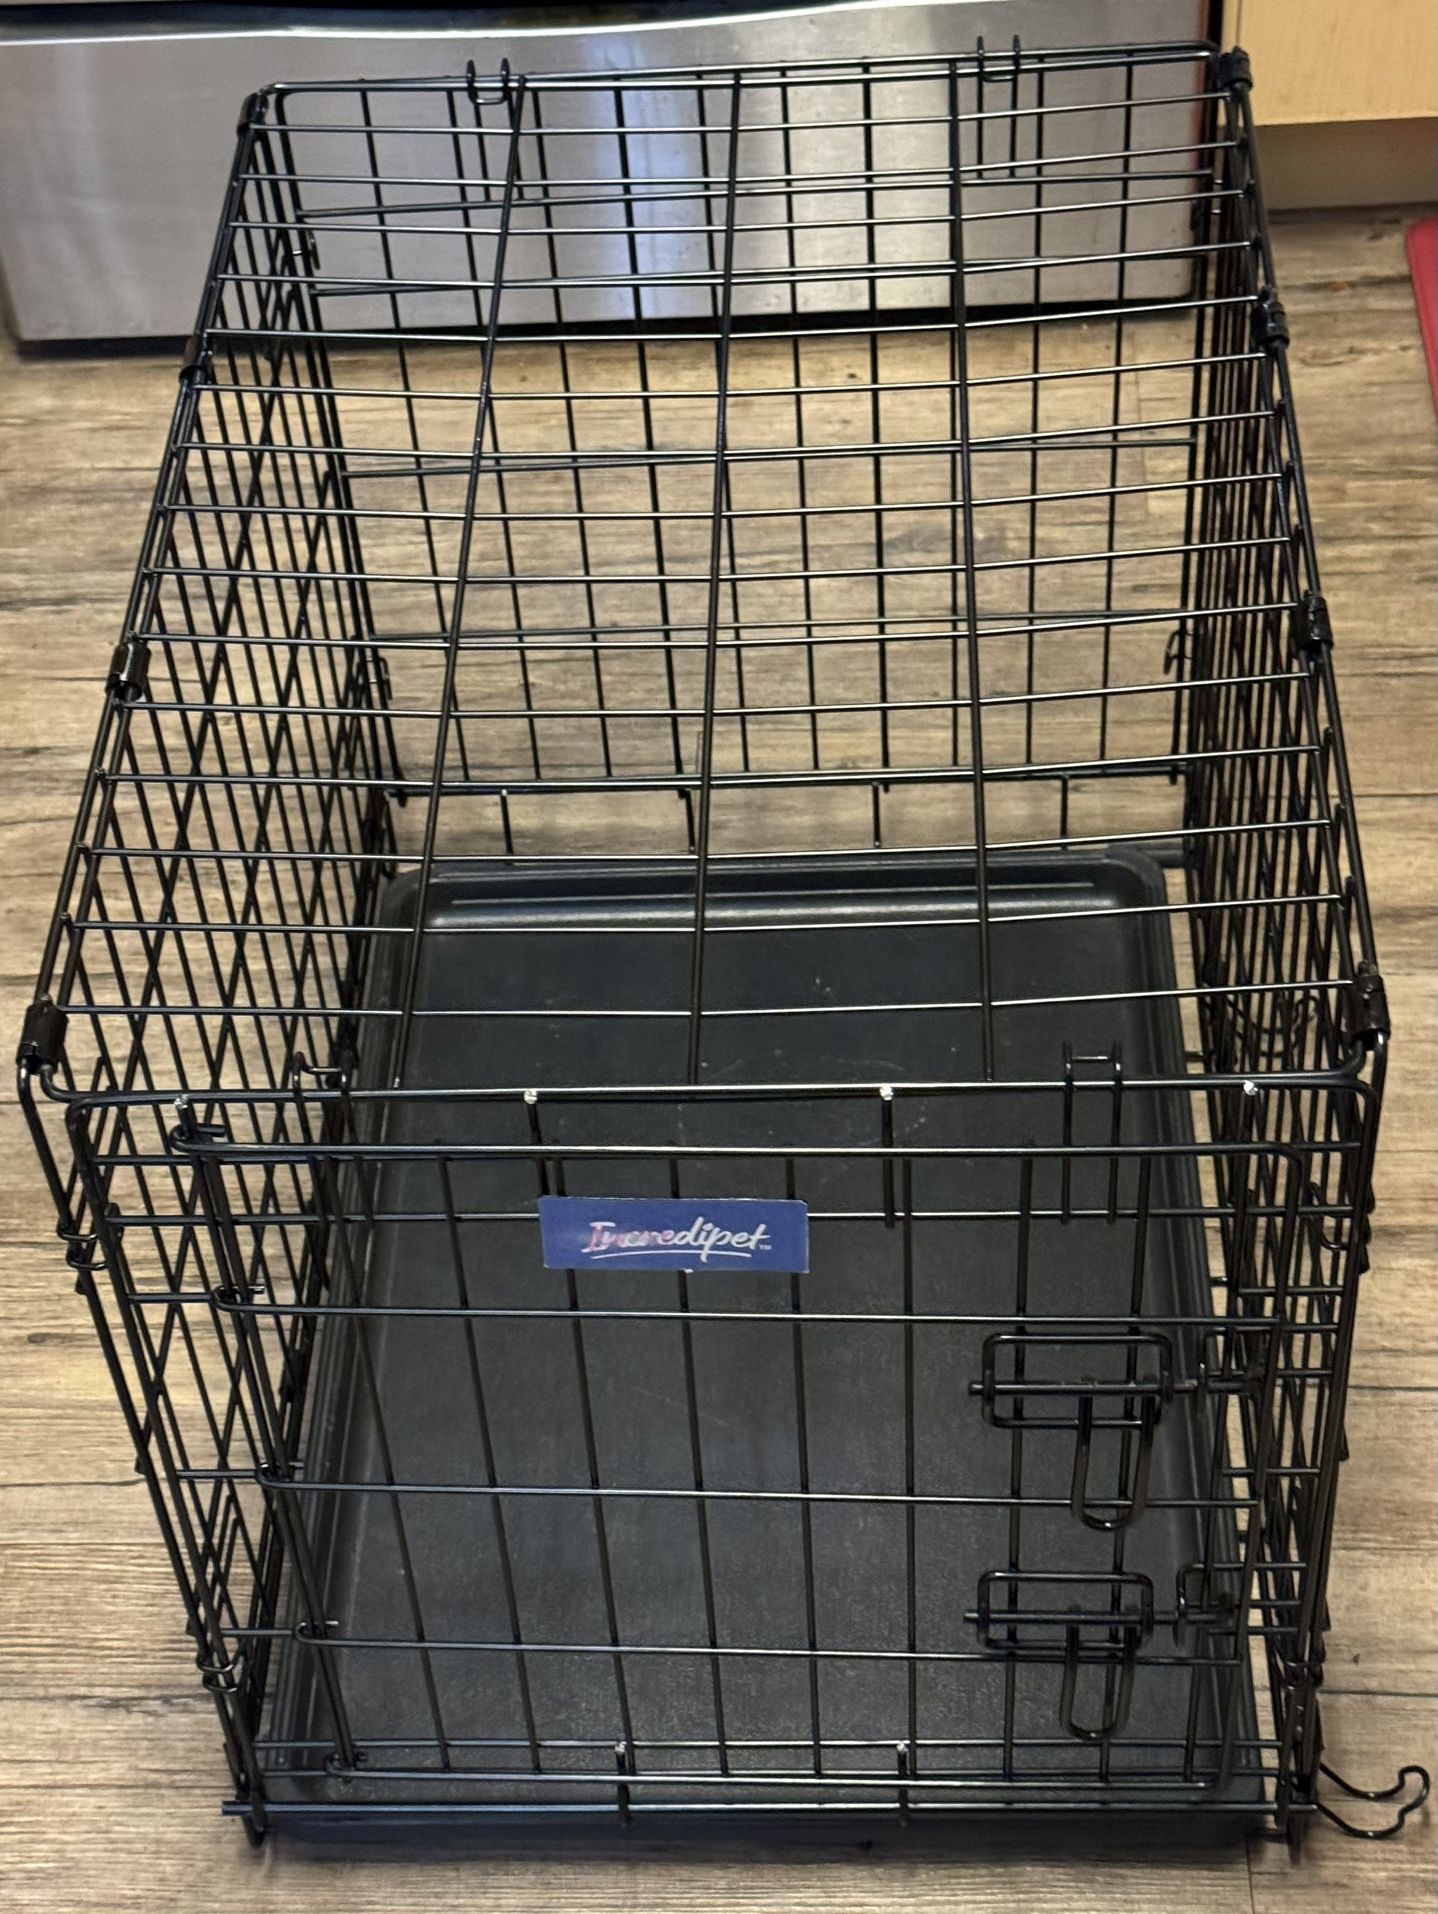 Incedipets One Door Foldable Pet Crate. Only Used A Few Time. Like New Condition. $35.00